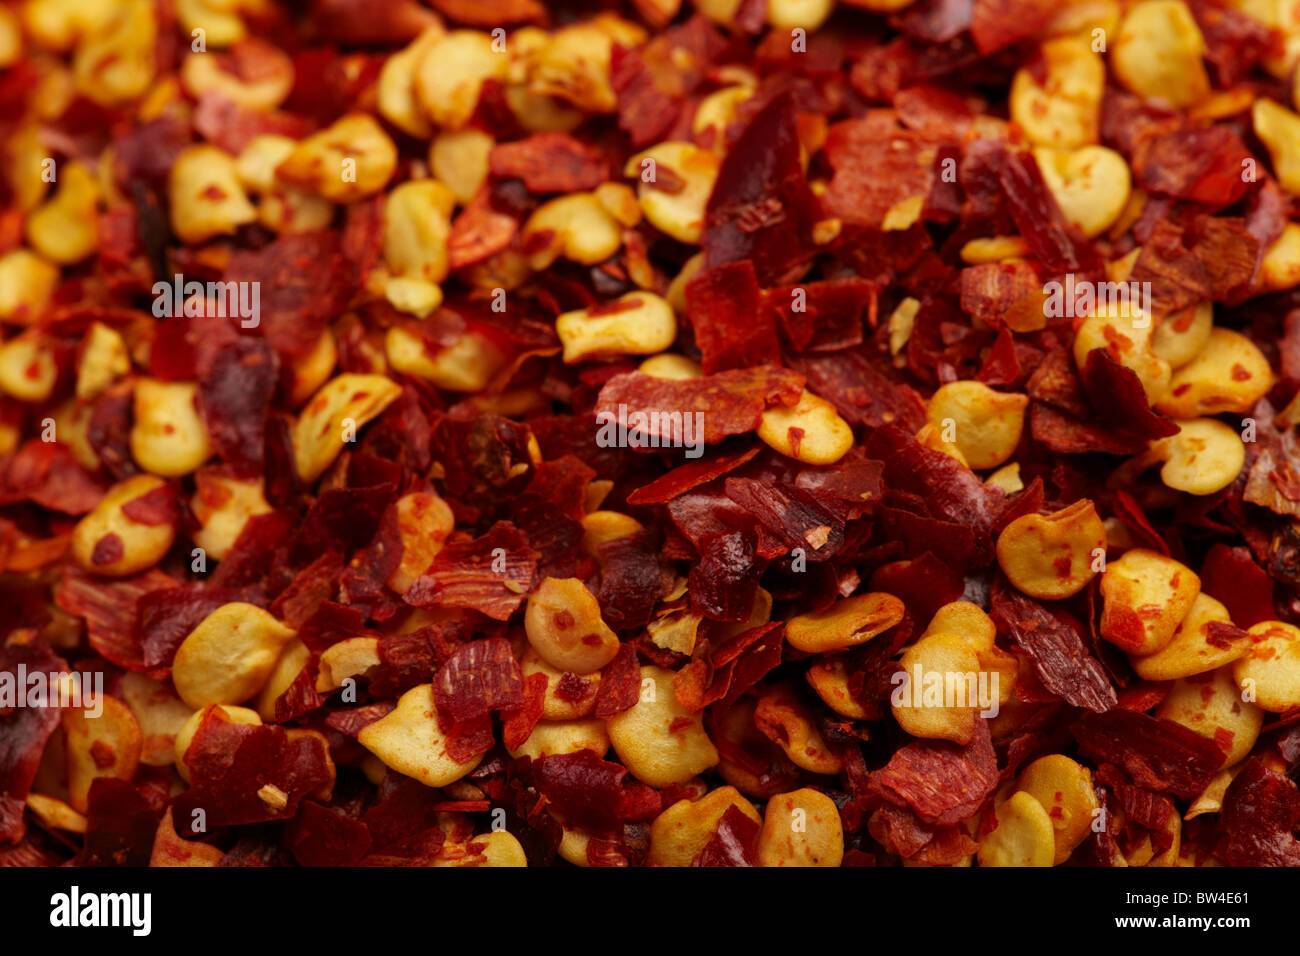 Macro photograph of a large number of dried chilli flakes Stock Photo